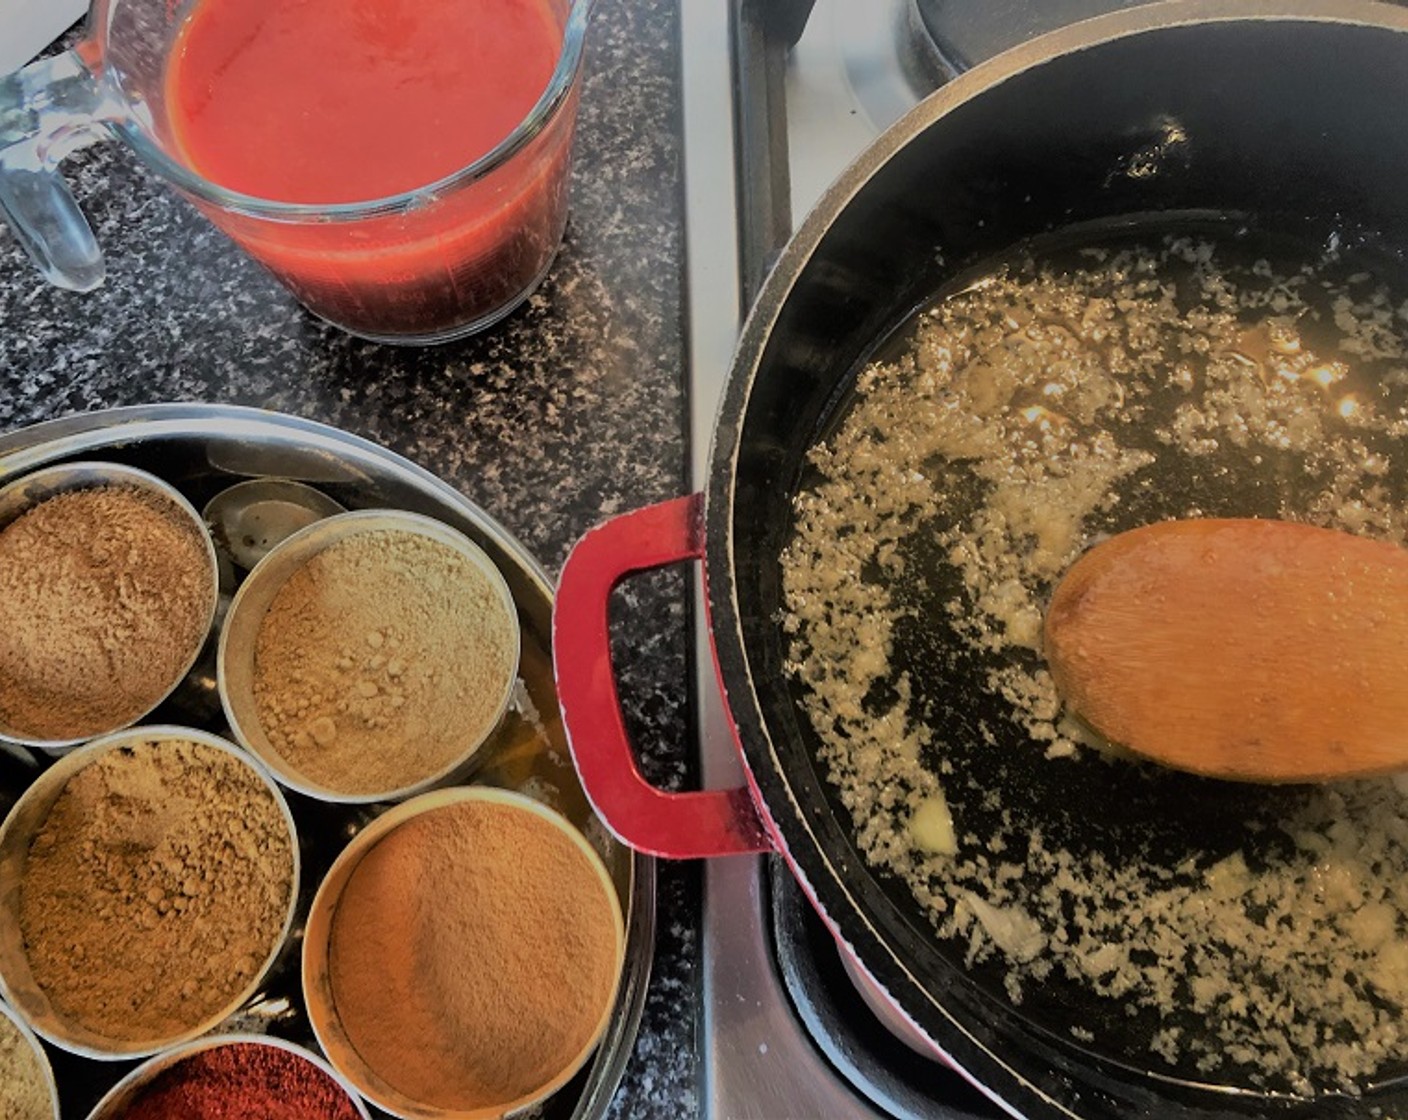 step 7 In the meanwhile, you can prepare the gravy by heating Butter (1 1/2 Tbsp) in a medium to large saucepan. Add the rest of the onion, ginger, and garlic puree and sauté for 2-3 minutes until fragrant. Place the Whole Cardamom Pods (3) pods and allow them to flavor.